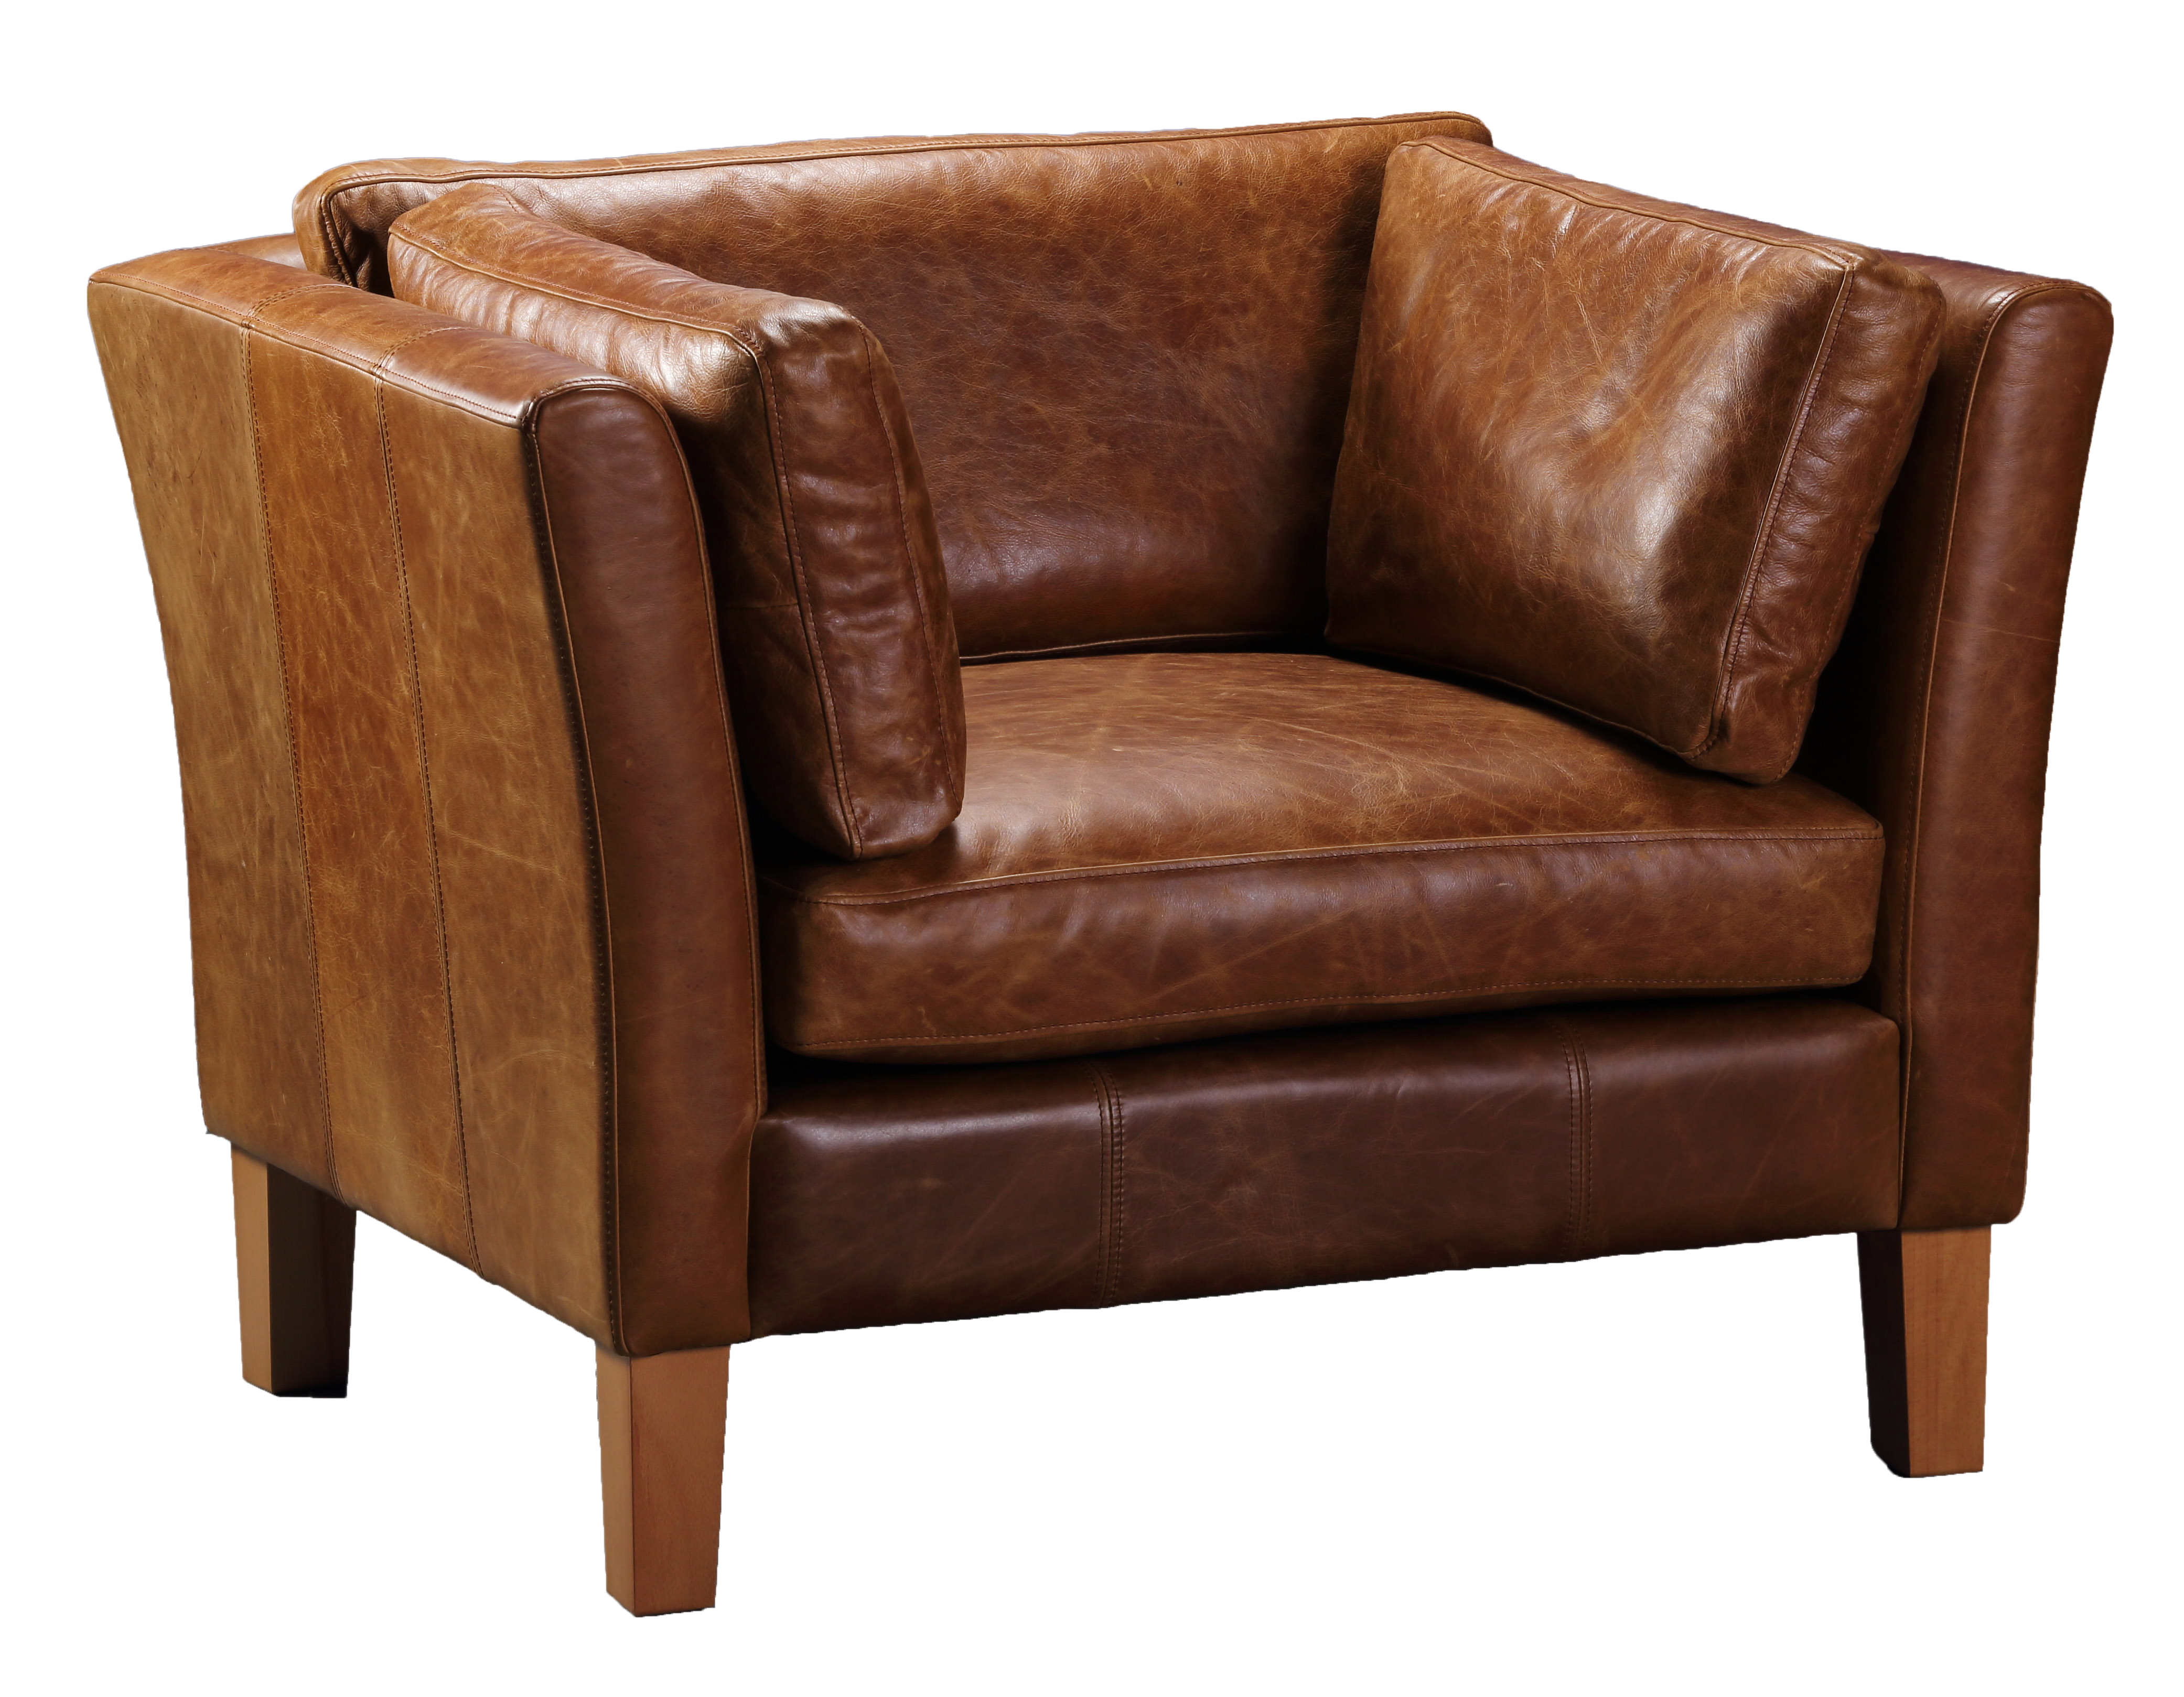 Barkby Full Aniline Leather Sofas-harris tweed leather sofas-Against The Grain Furniture-Chair-Against The Grain Furniture